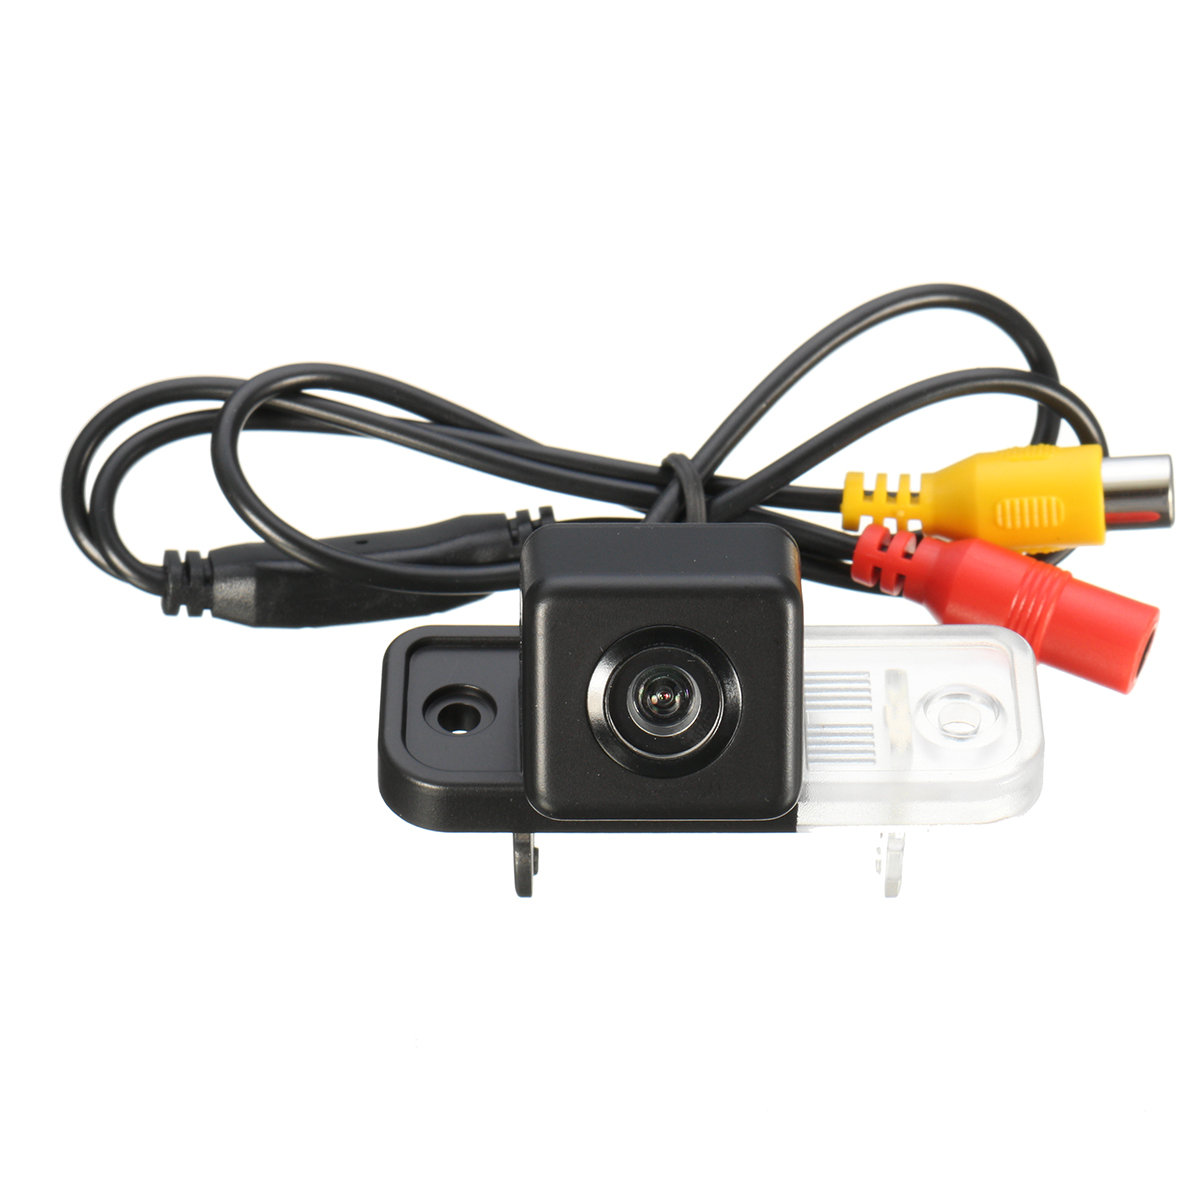 

Car CCD Rear View Camera For Mercedes Benz C - Class W203 W211 CLS W219